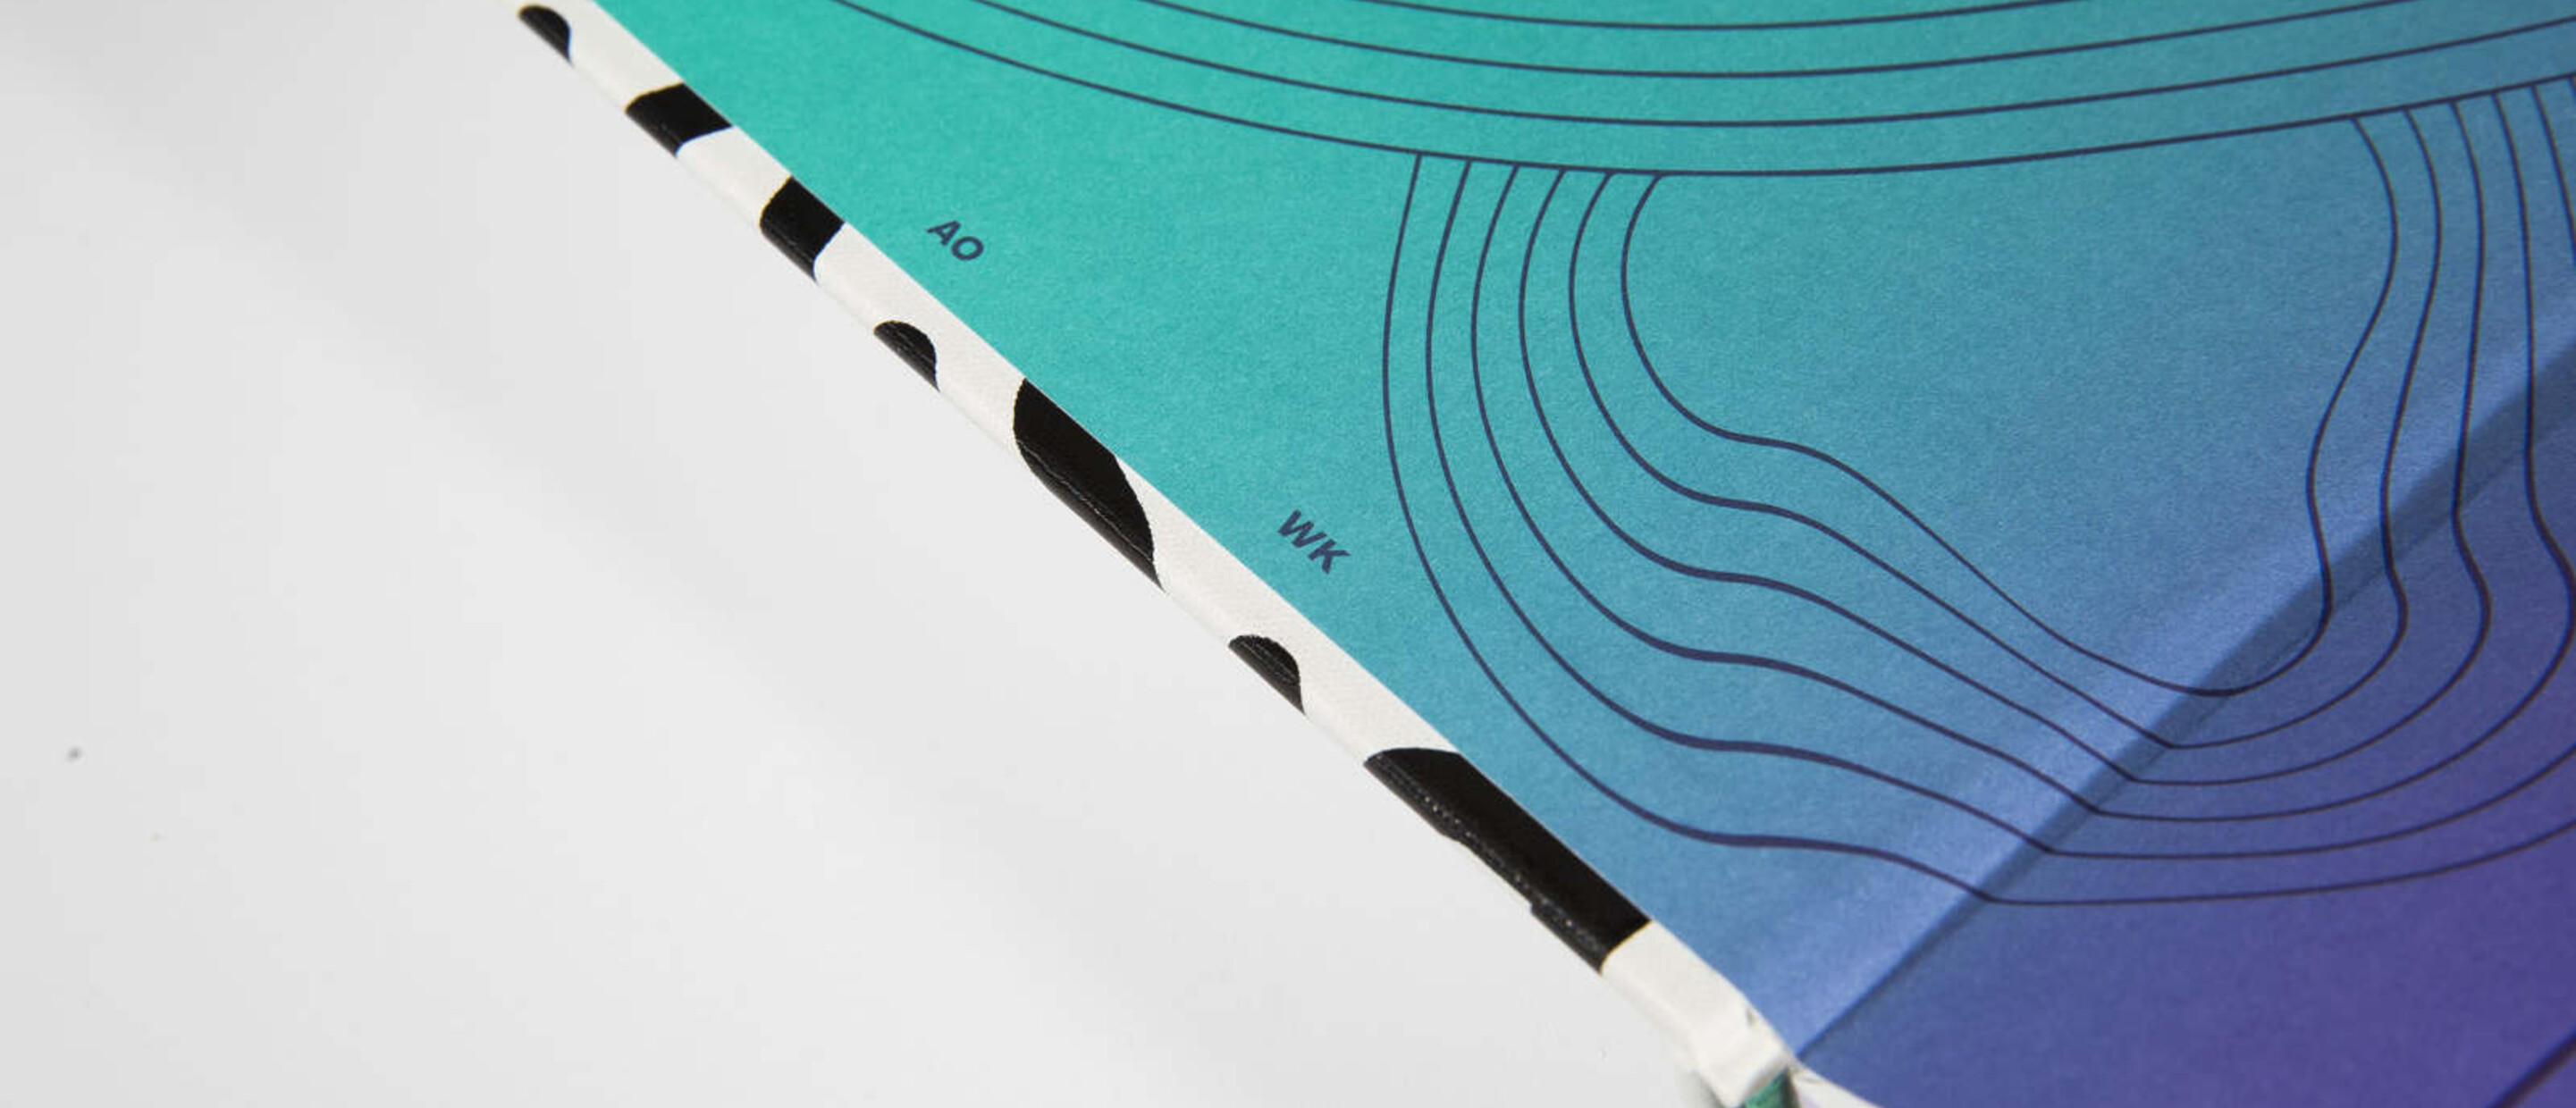 Catalogue cover lining in blues and purples and greens with wavy black lines in its design